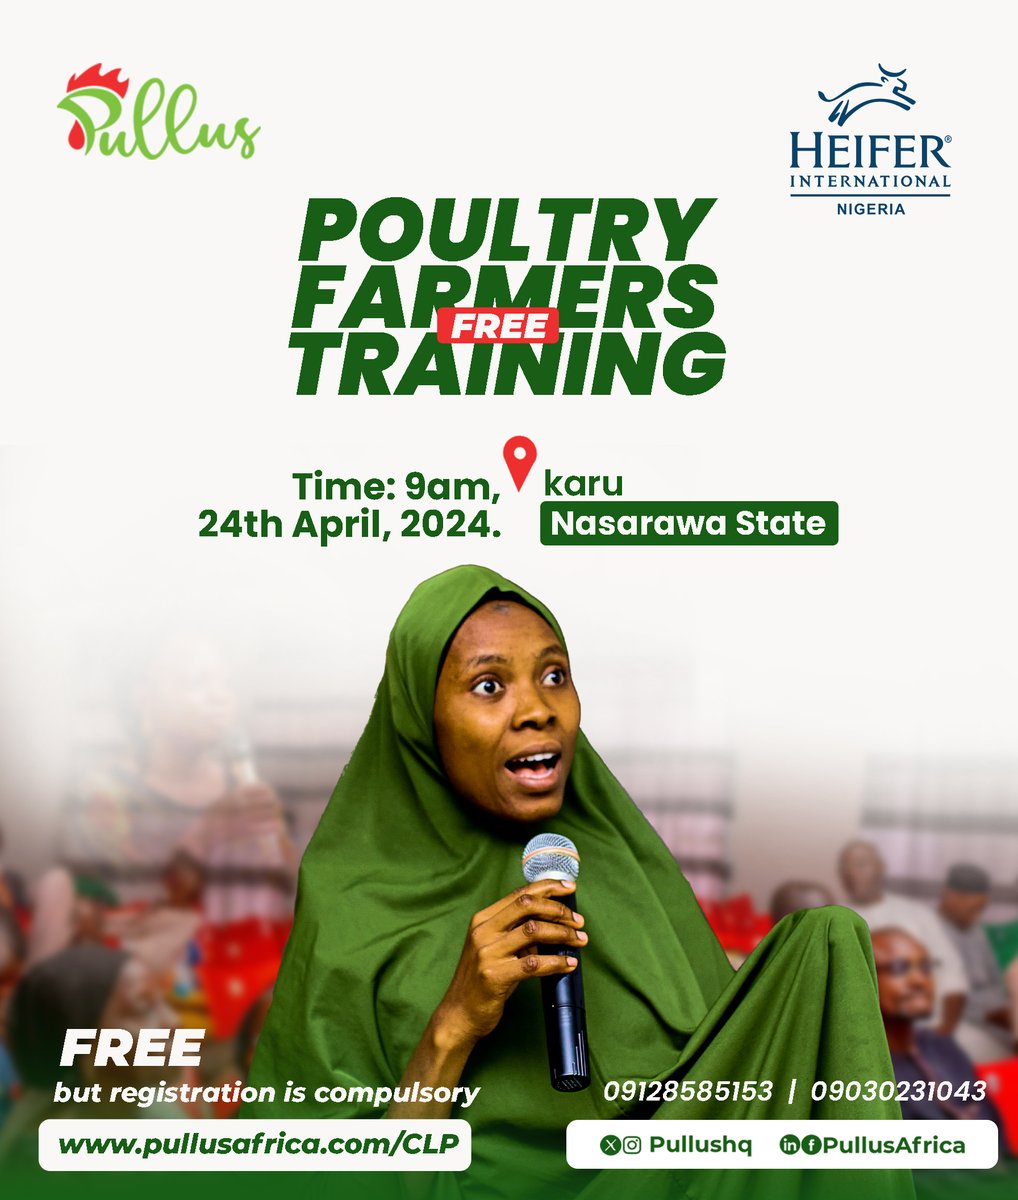 Pullus Africa in partnership with @heifernigeria , is thrilled to announce our next batch of Poultry Farmers Training in Karu, Nasarawa State.
Training is free but registration is compulsory. Secure your spot today at pullusafrica.com/CLP
#PullusAfrica #HeiferNigeria